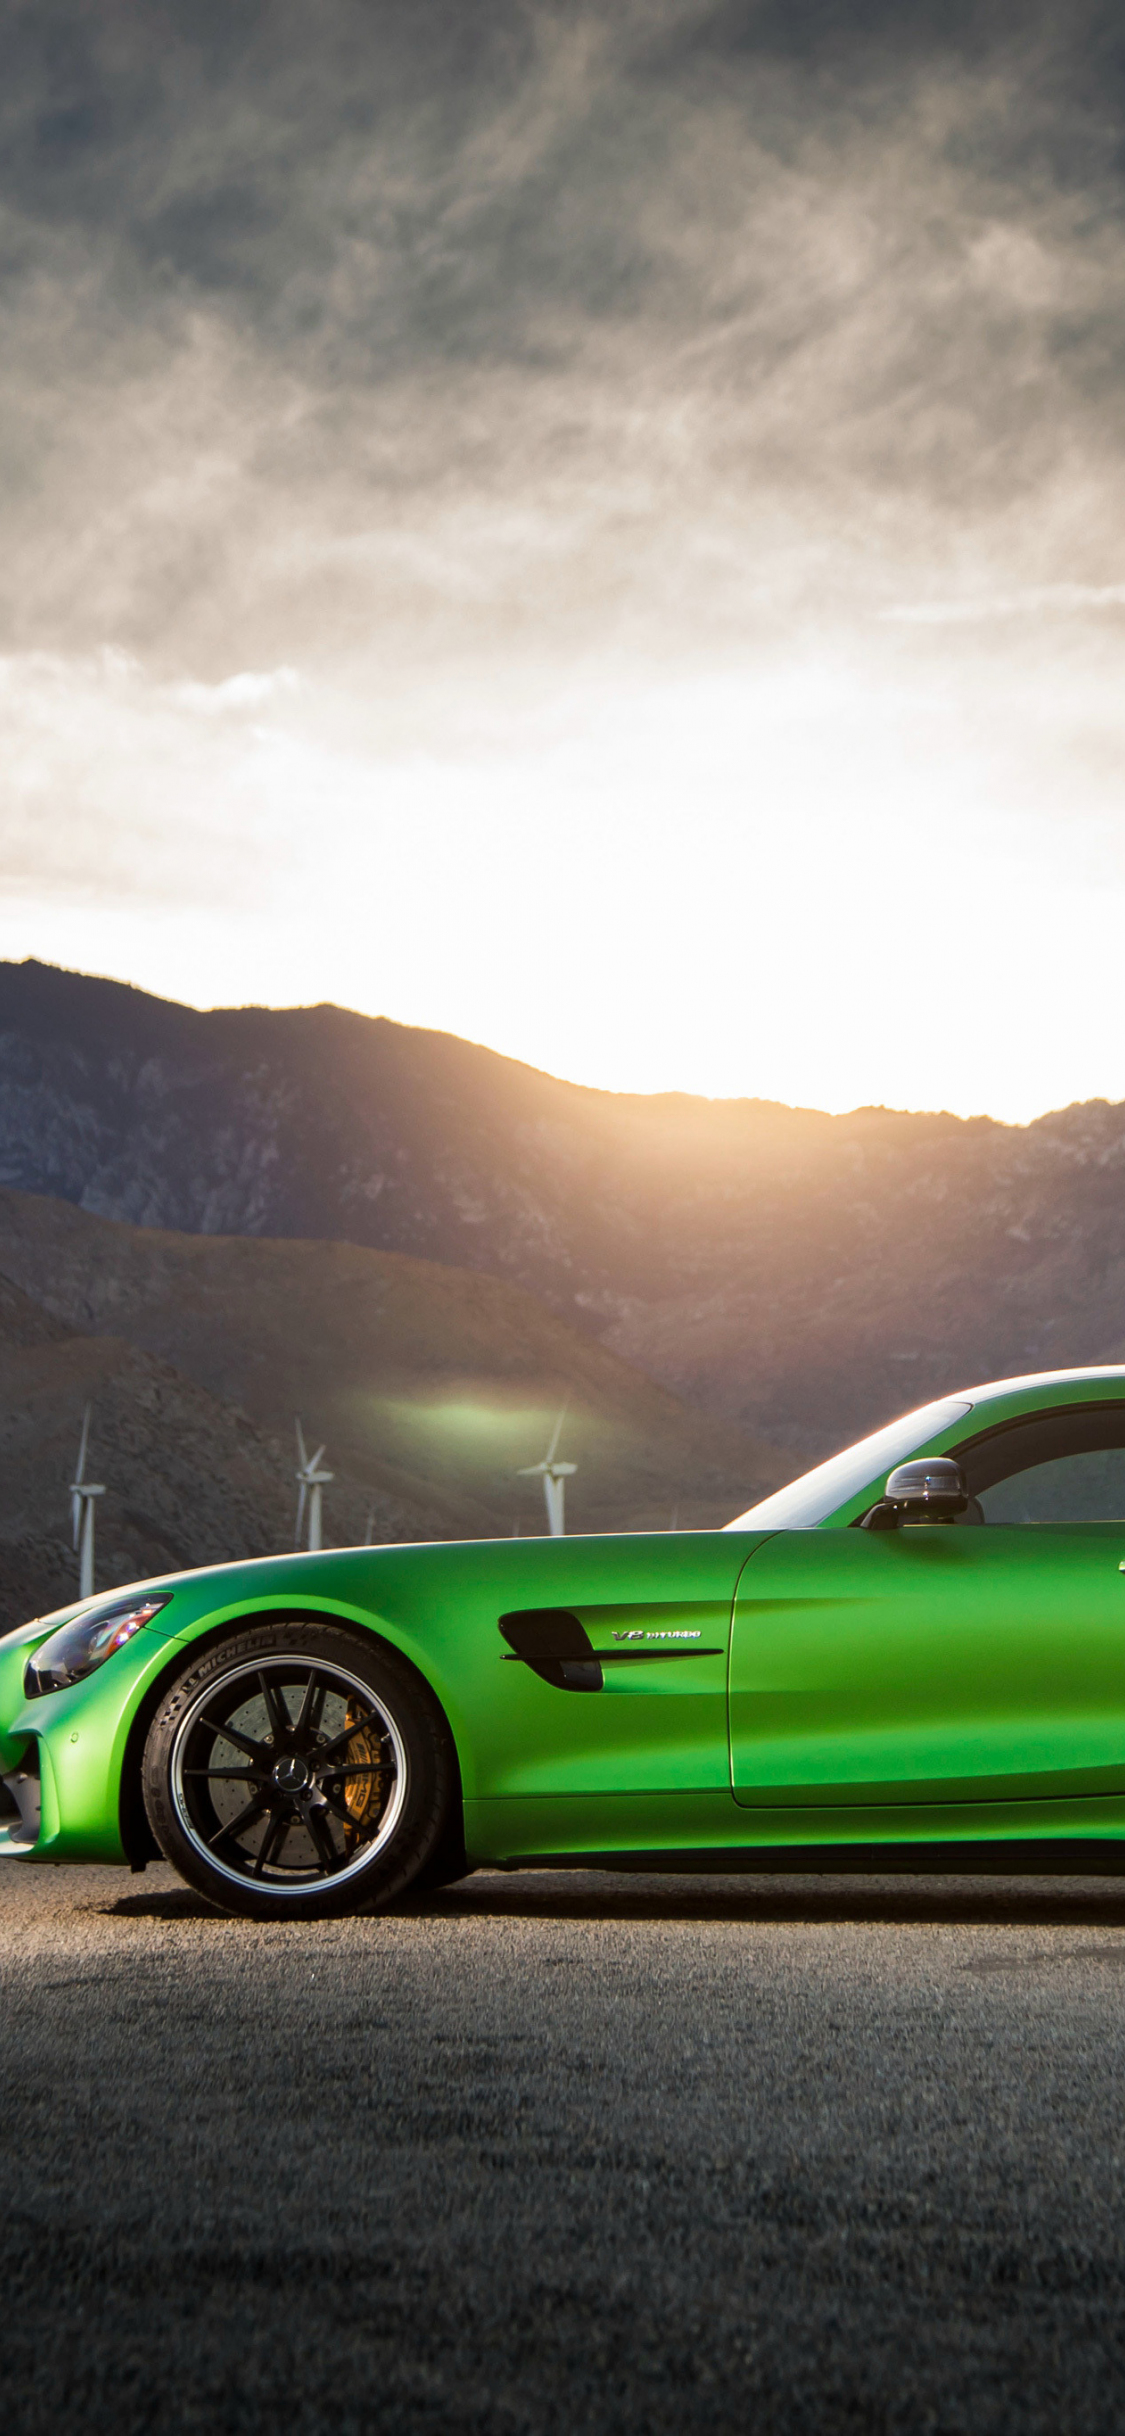 Amg Gtr Pictures  Download Free Images on Unsplash